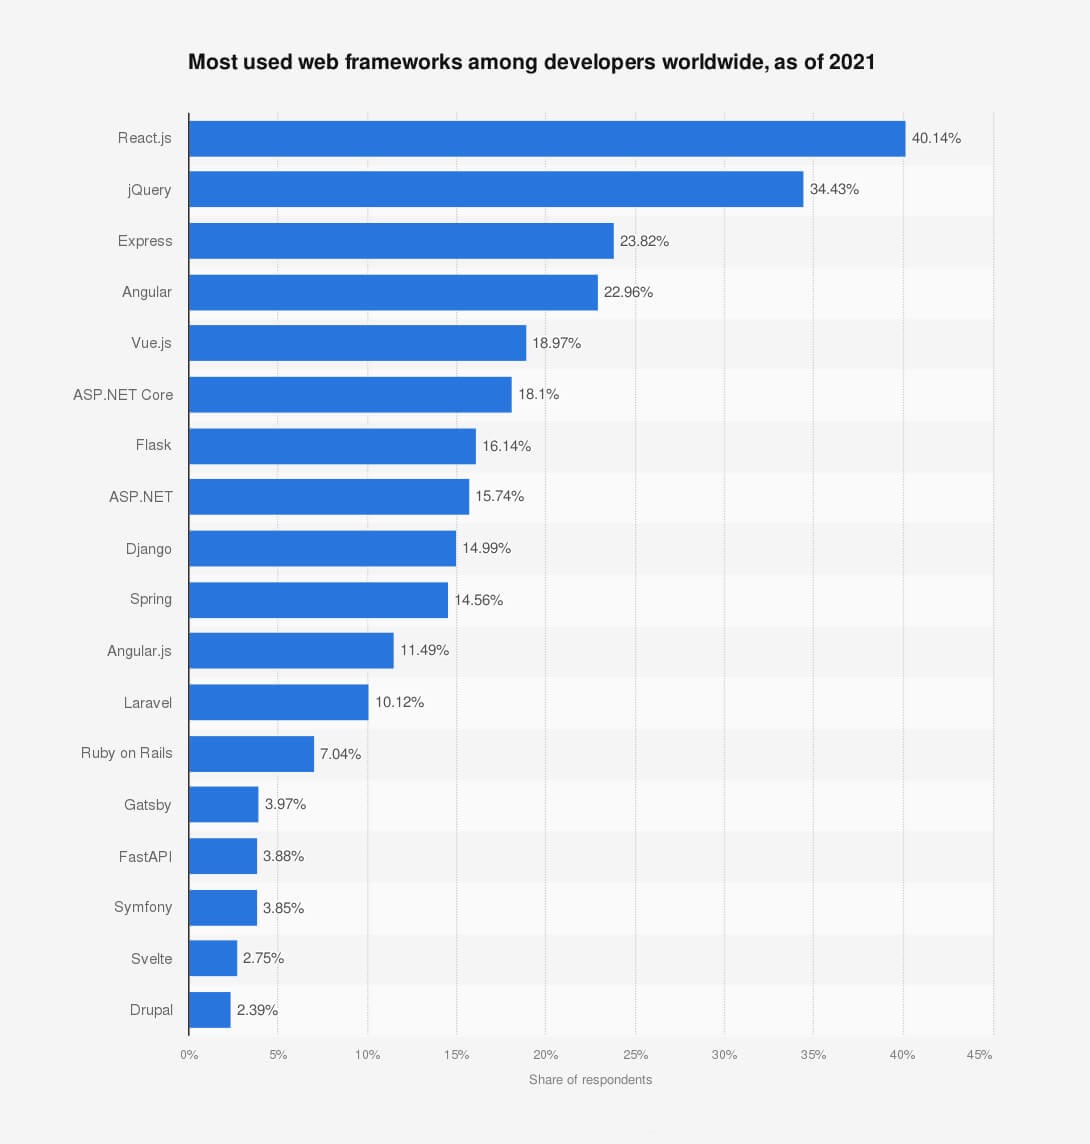 Most used web frameworks among developers worldwide as of 2021